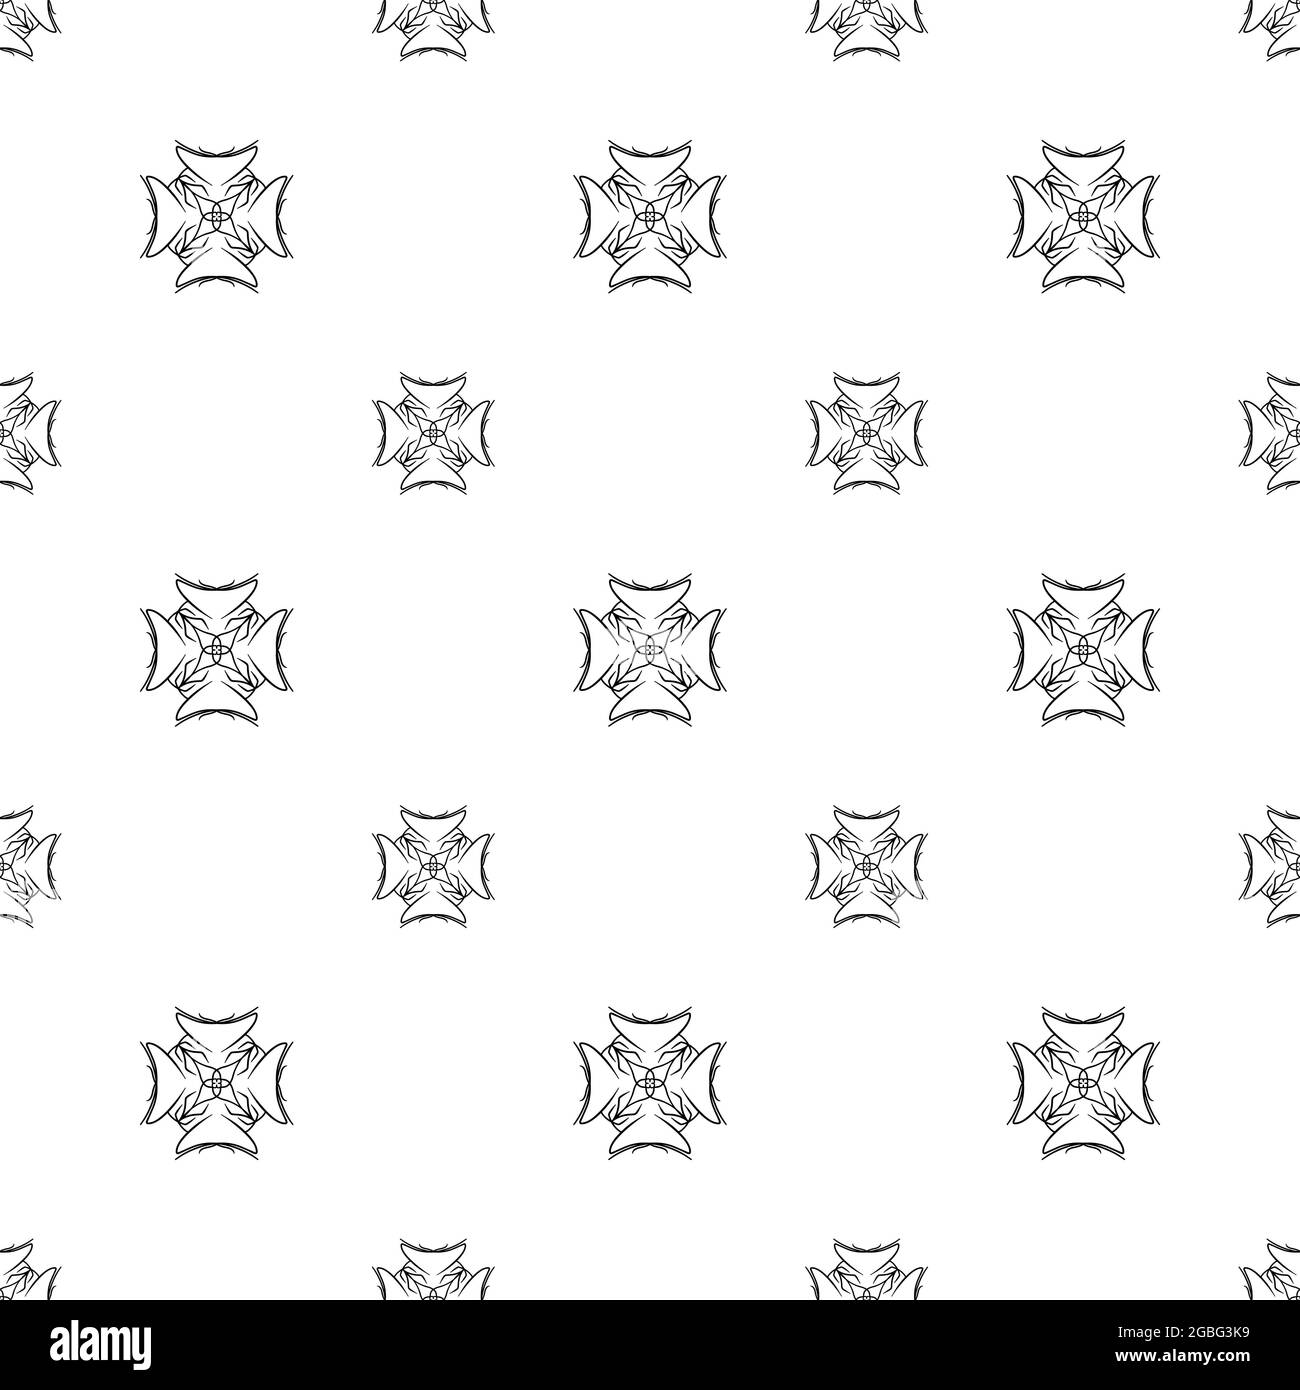 Hand-drawn floral and mandala outline seamless pattern Stock Photo